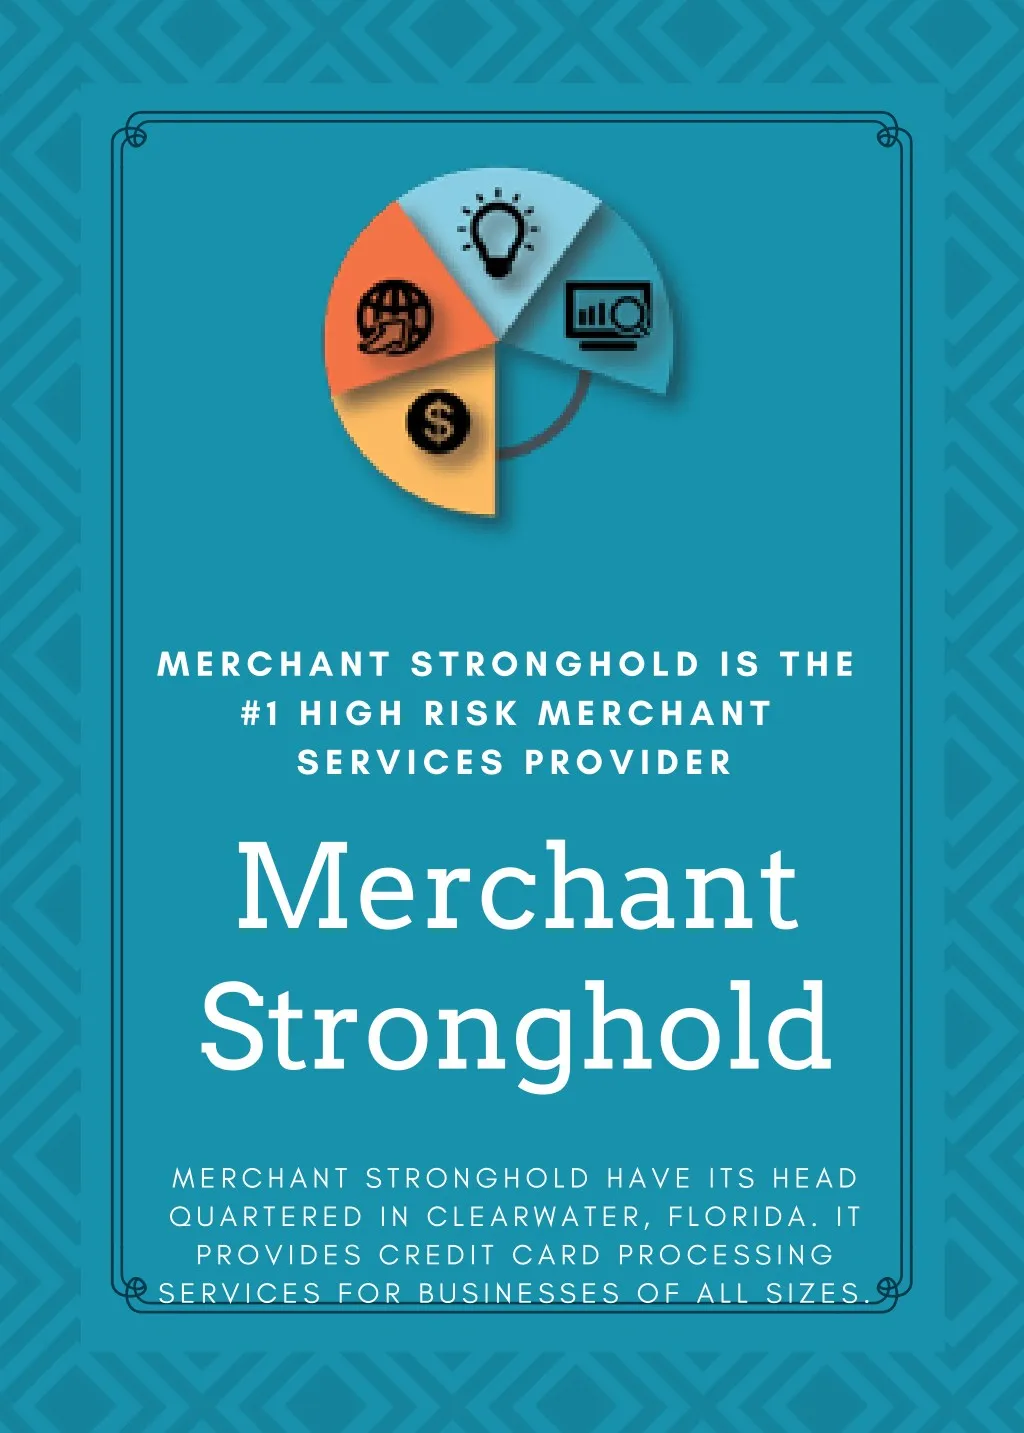 merchant stronghold is the